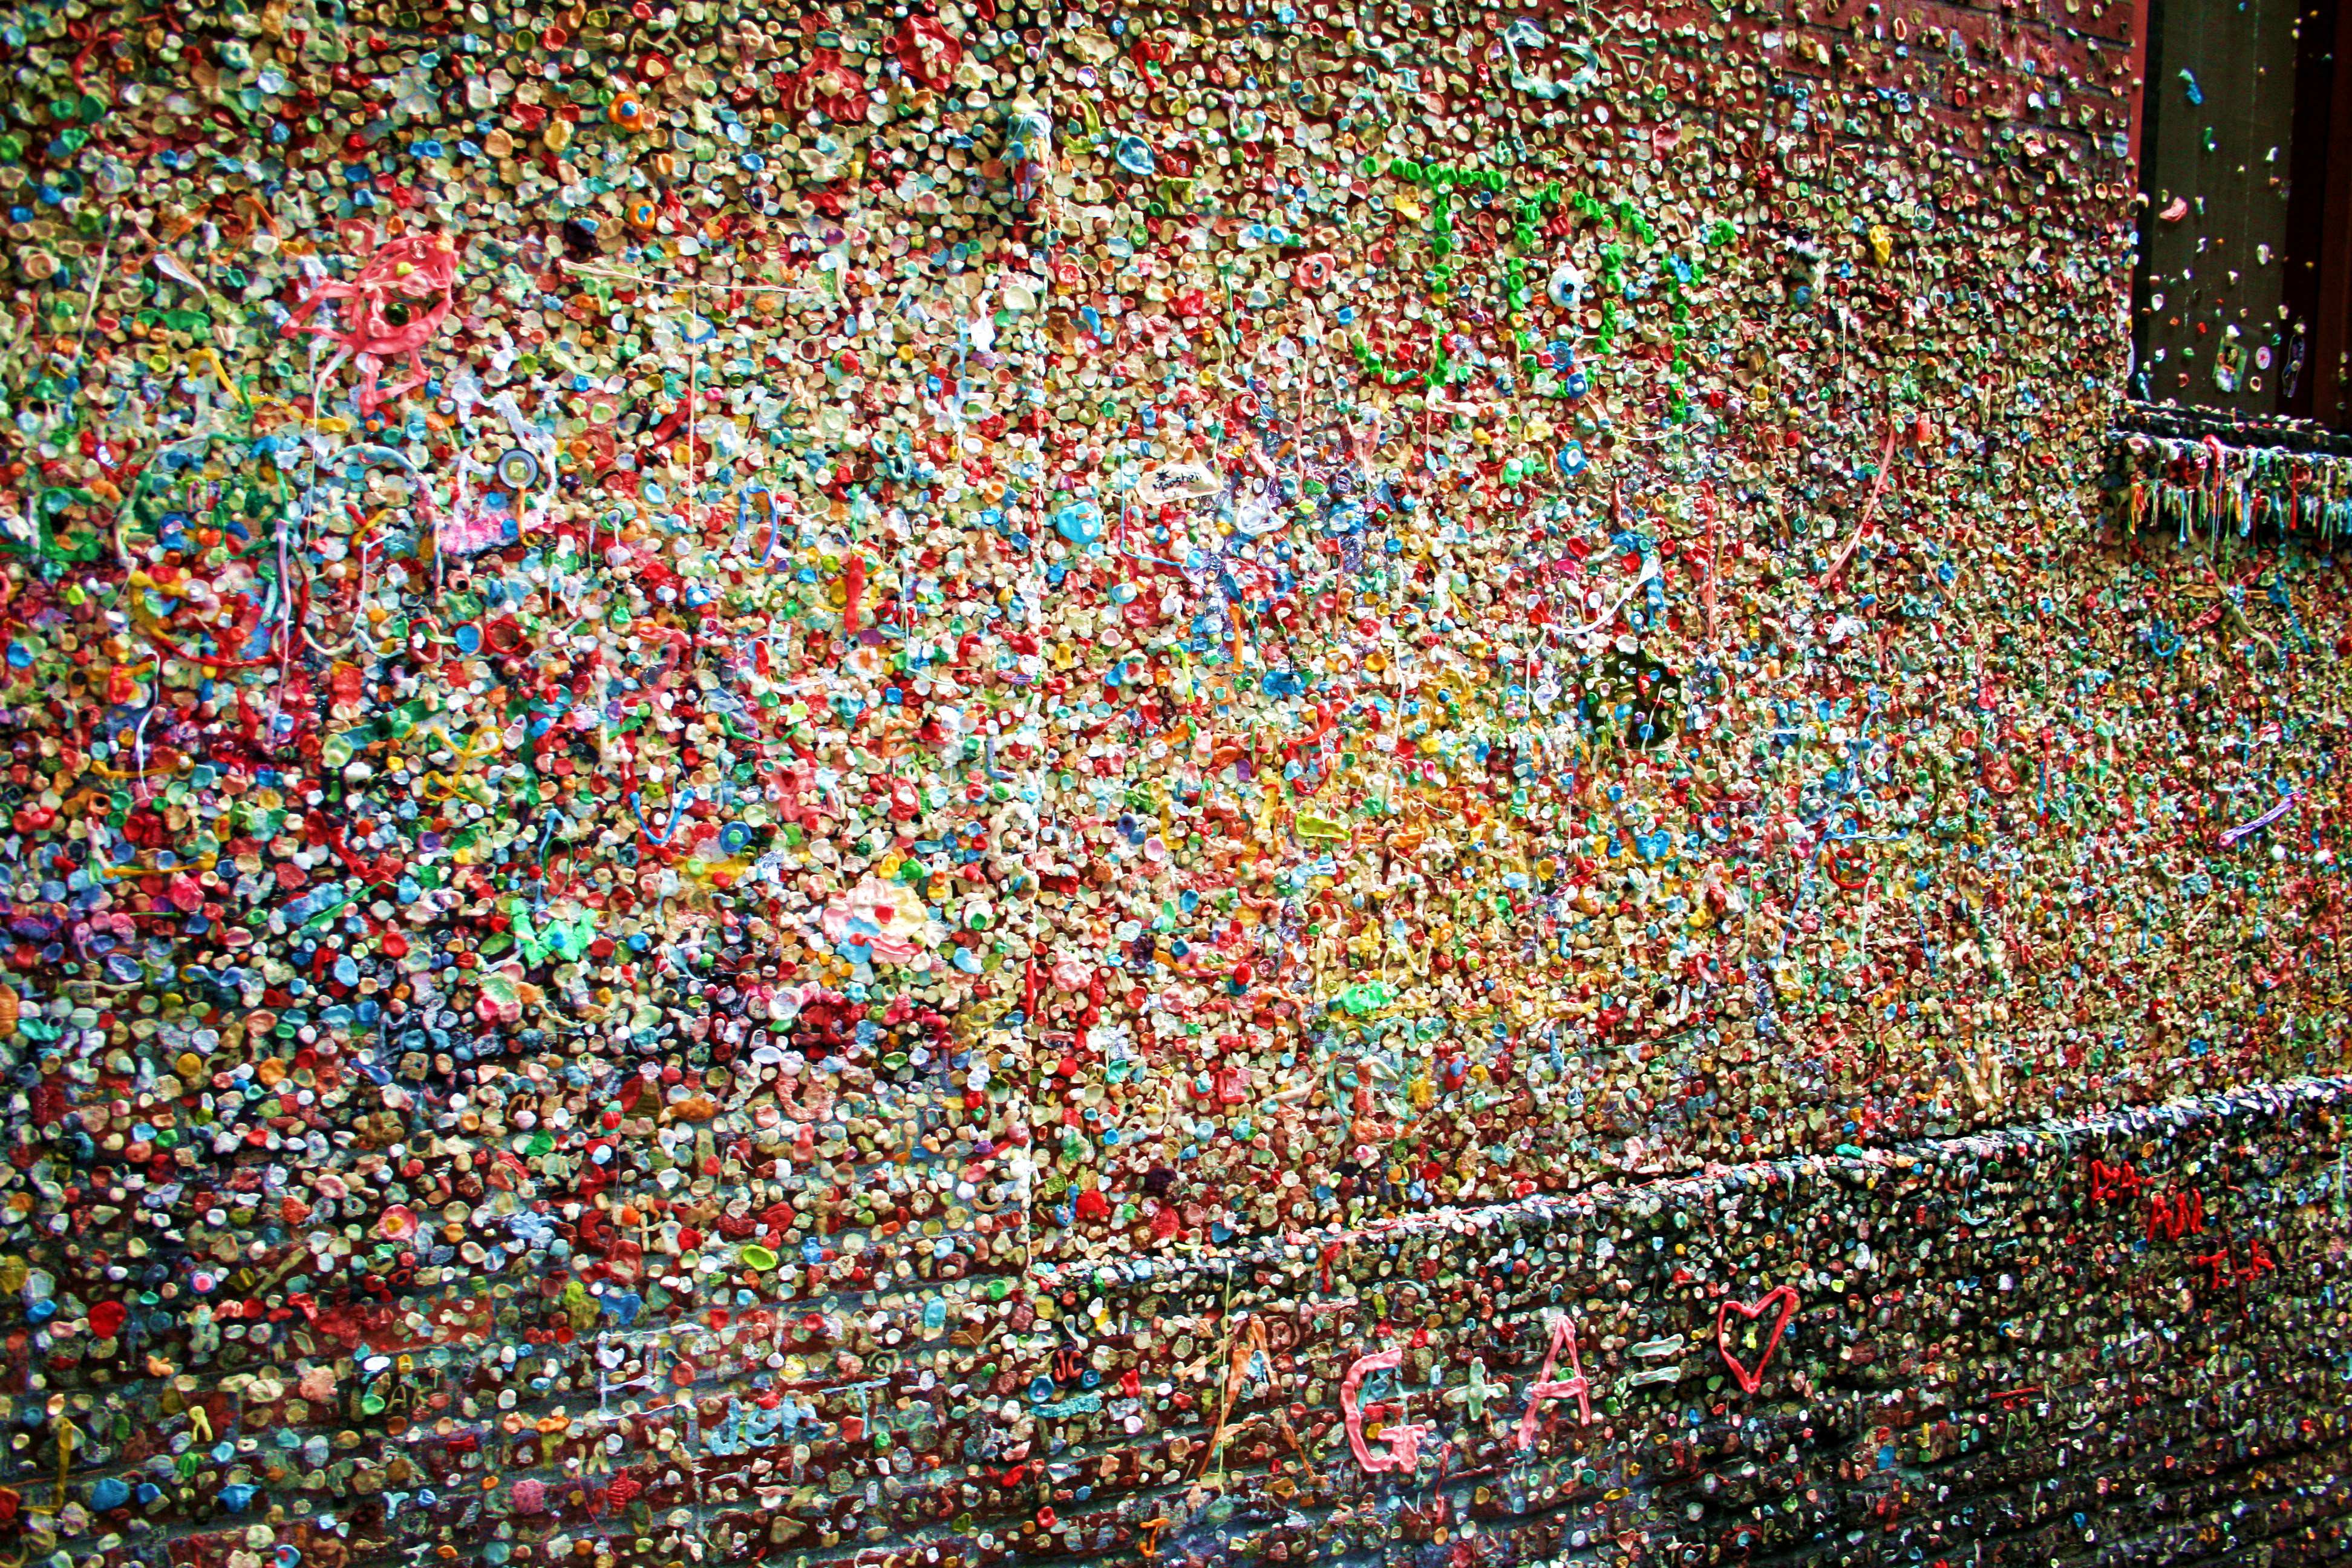 Seattle's Gum Wall Is The 'World's Second Germiest Attraction'